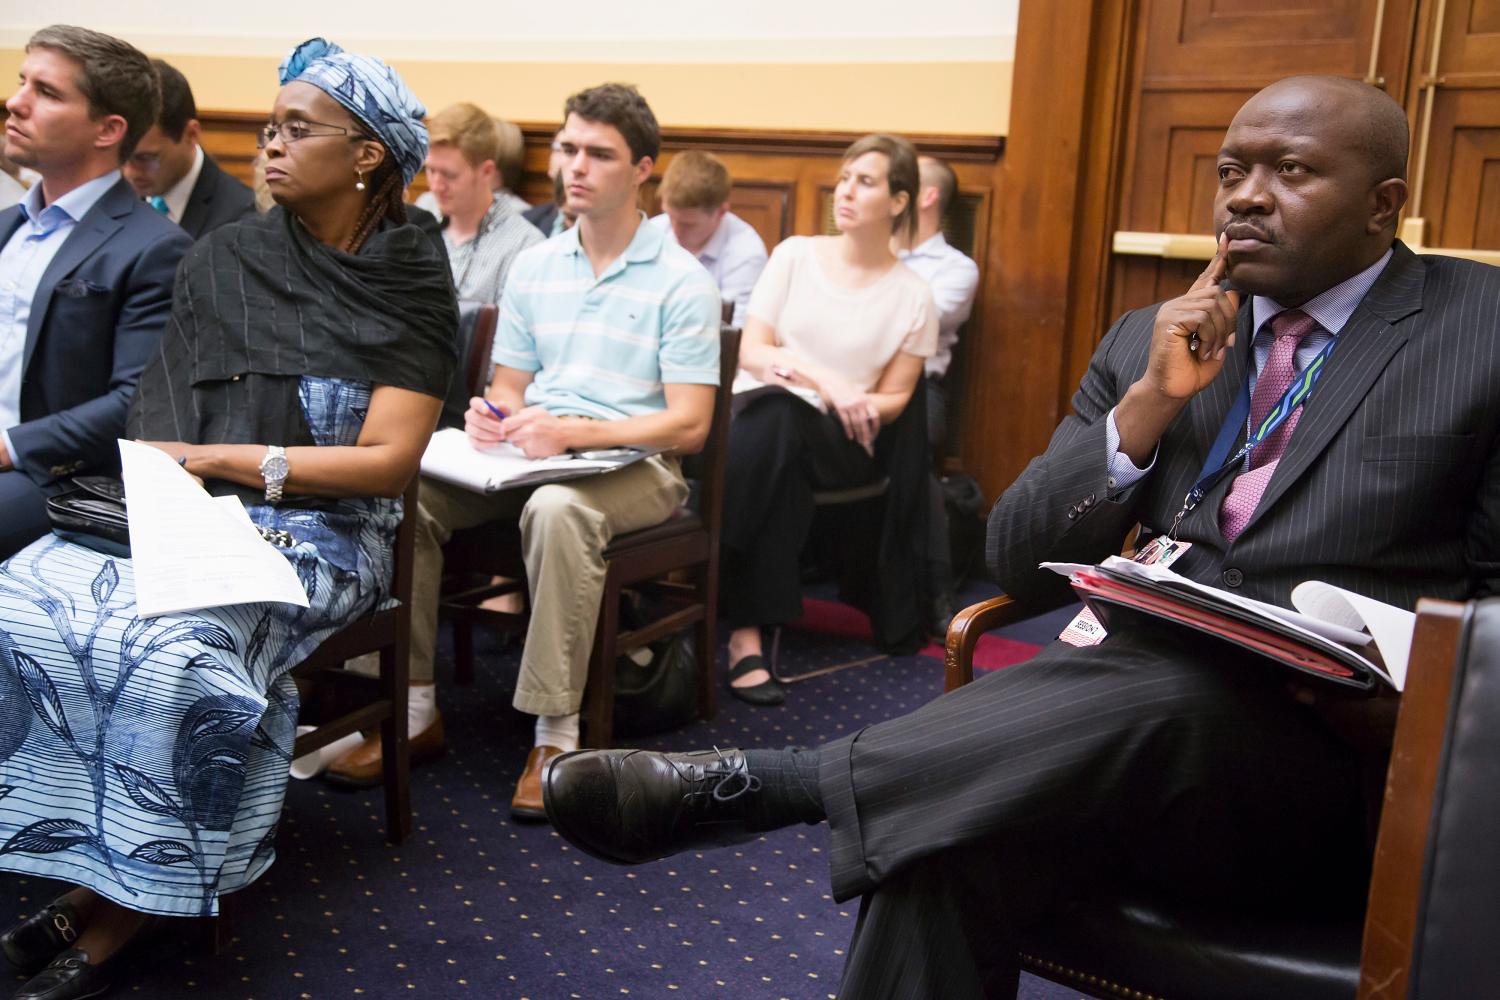 Liberia's Foreign Minister Ngafuan attends a hearing of a House Foreign Affairs subcommittee, about the Ebola crisis in West Africa, on Capitol Hill in Washington